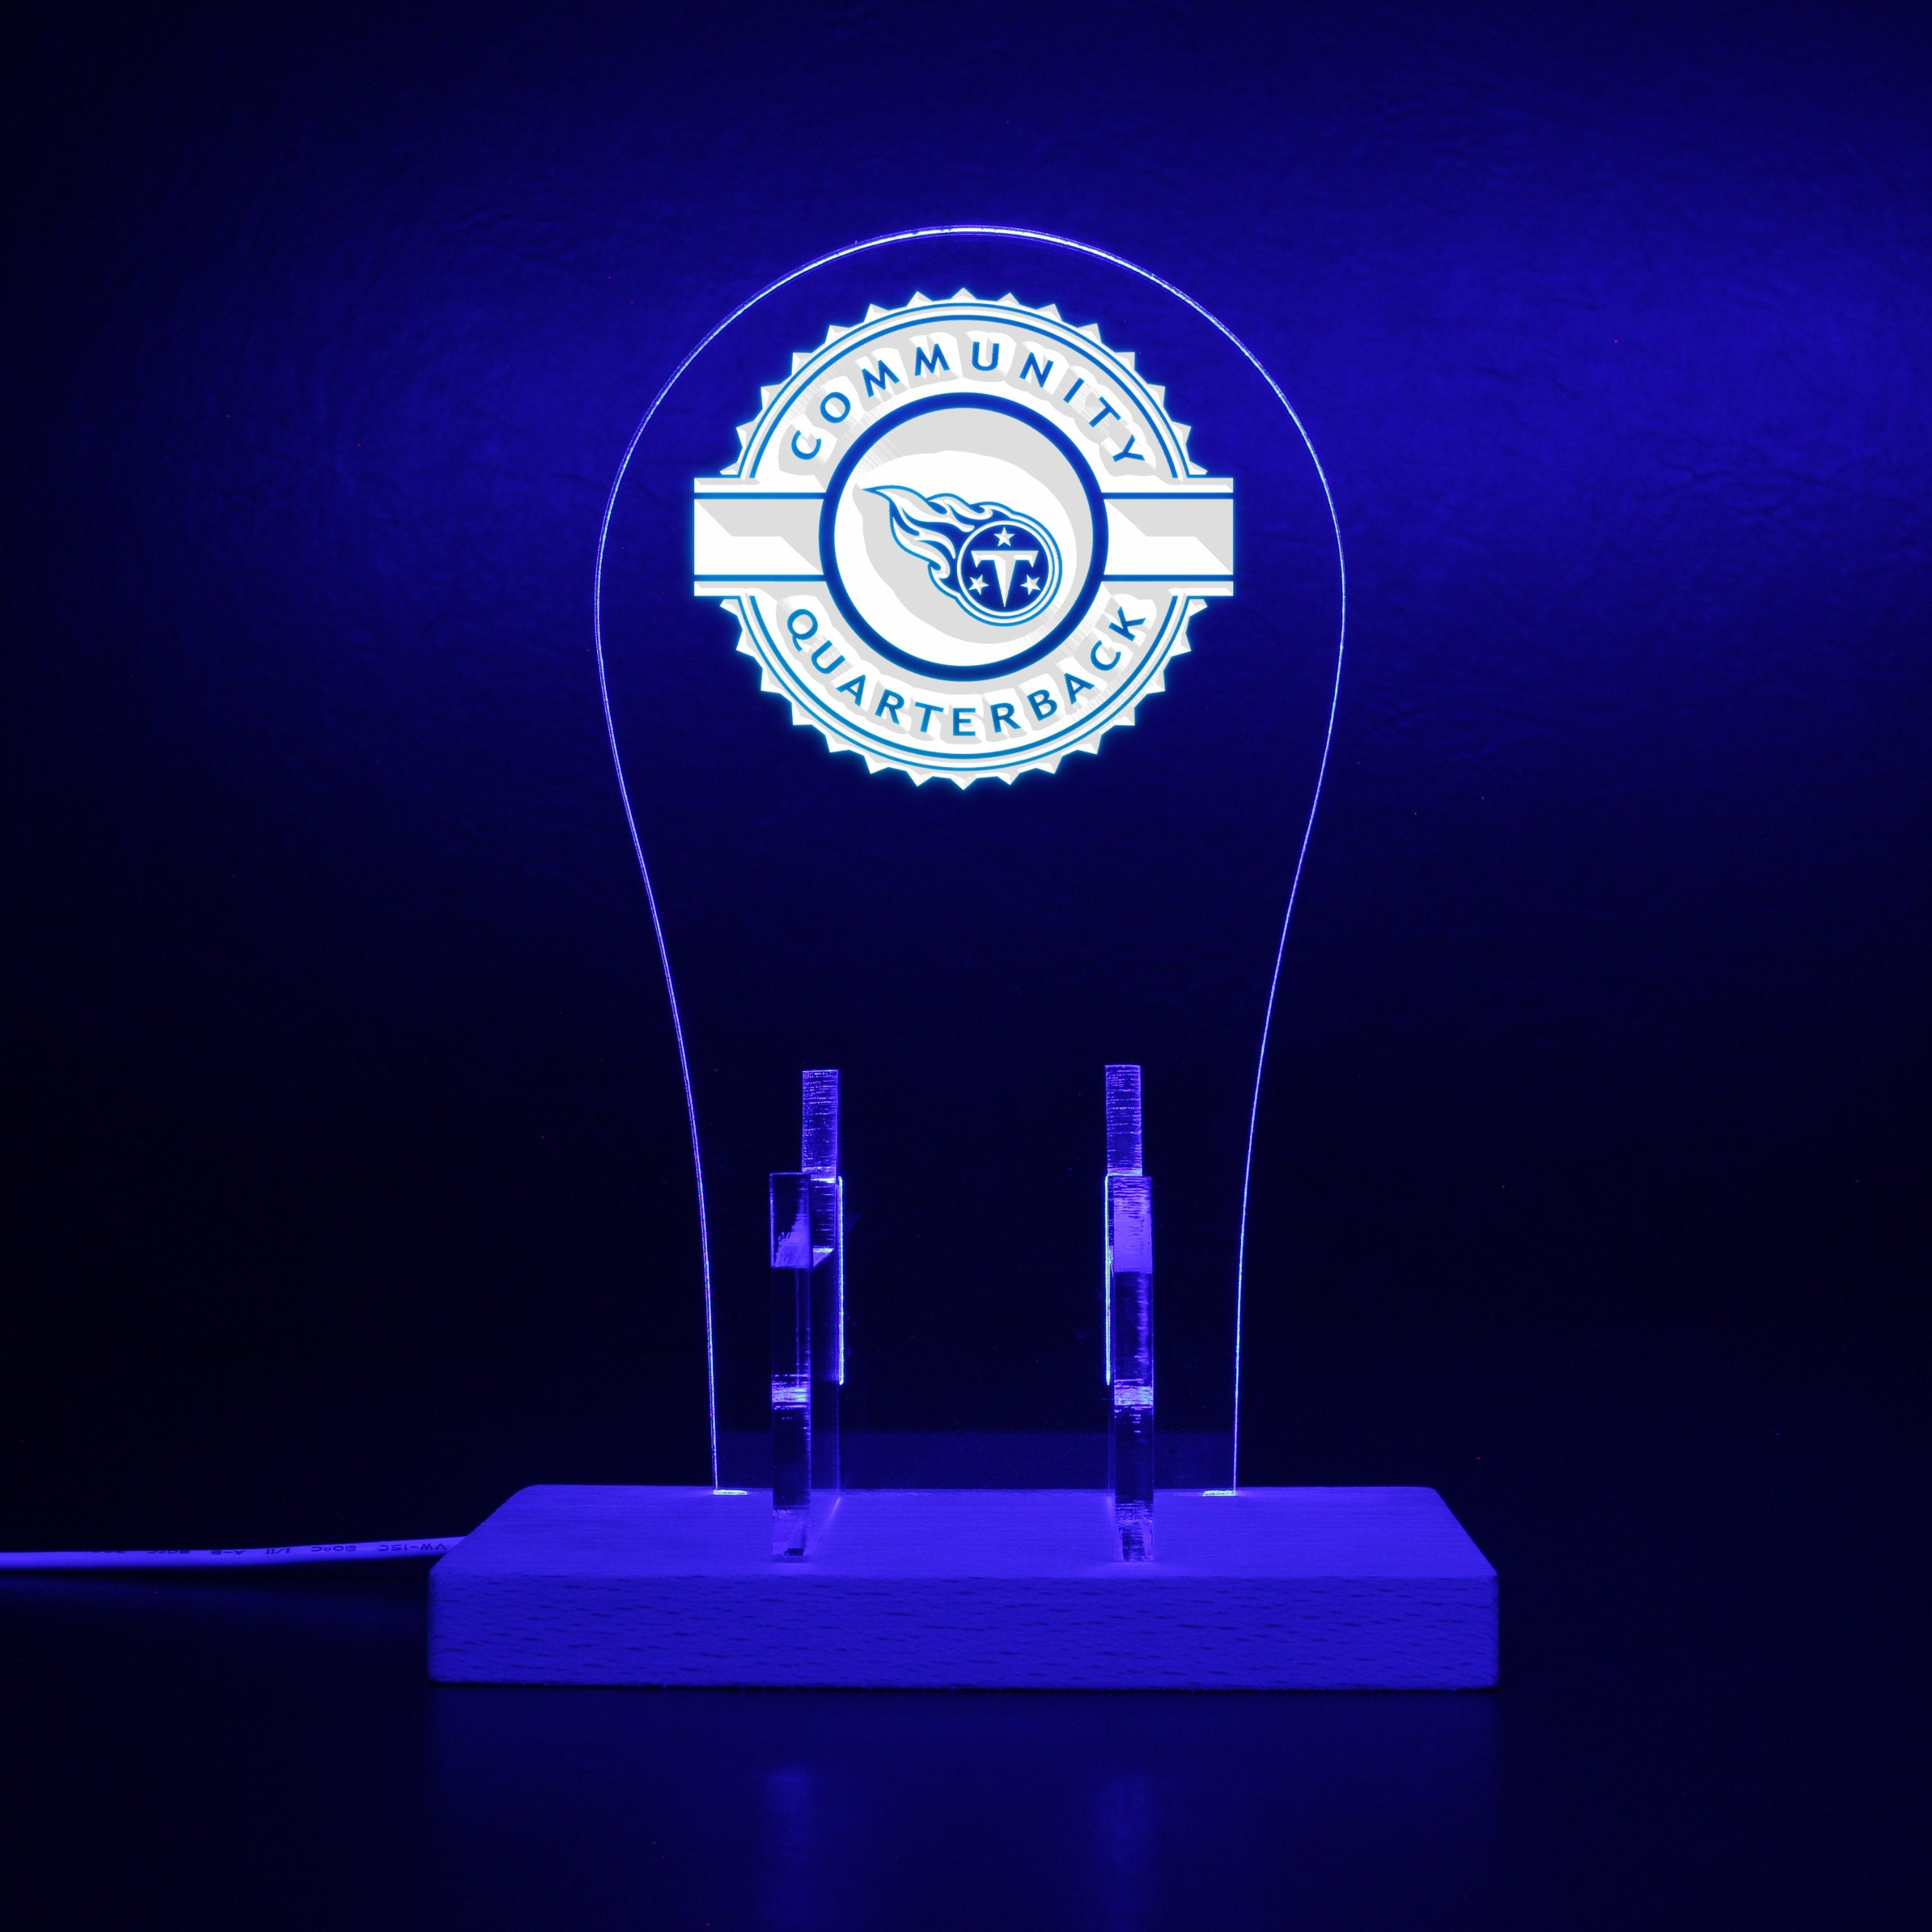 Tennessee Titans RGB LED Gaming Headset Controller Stand